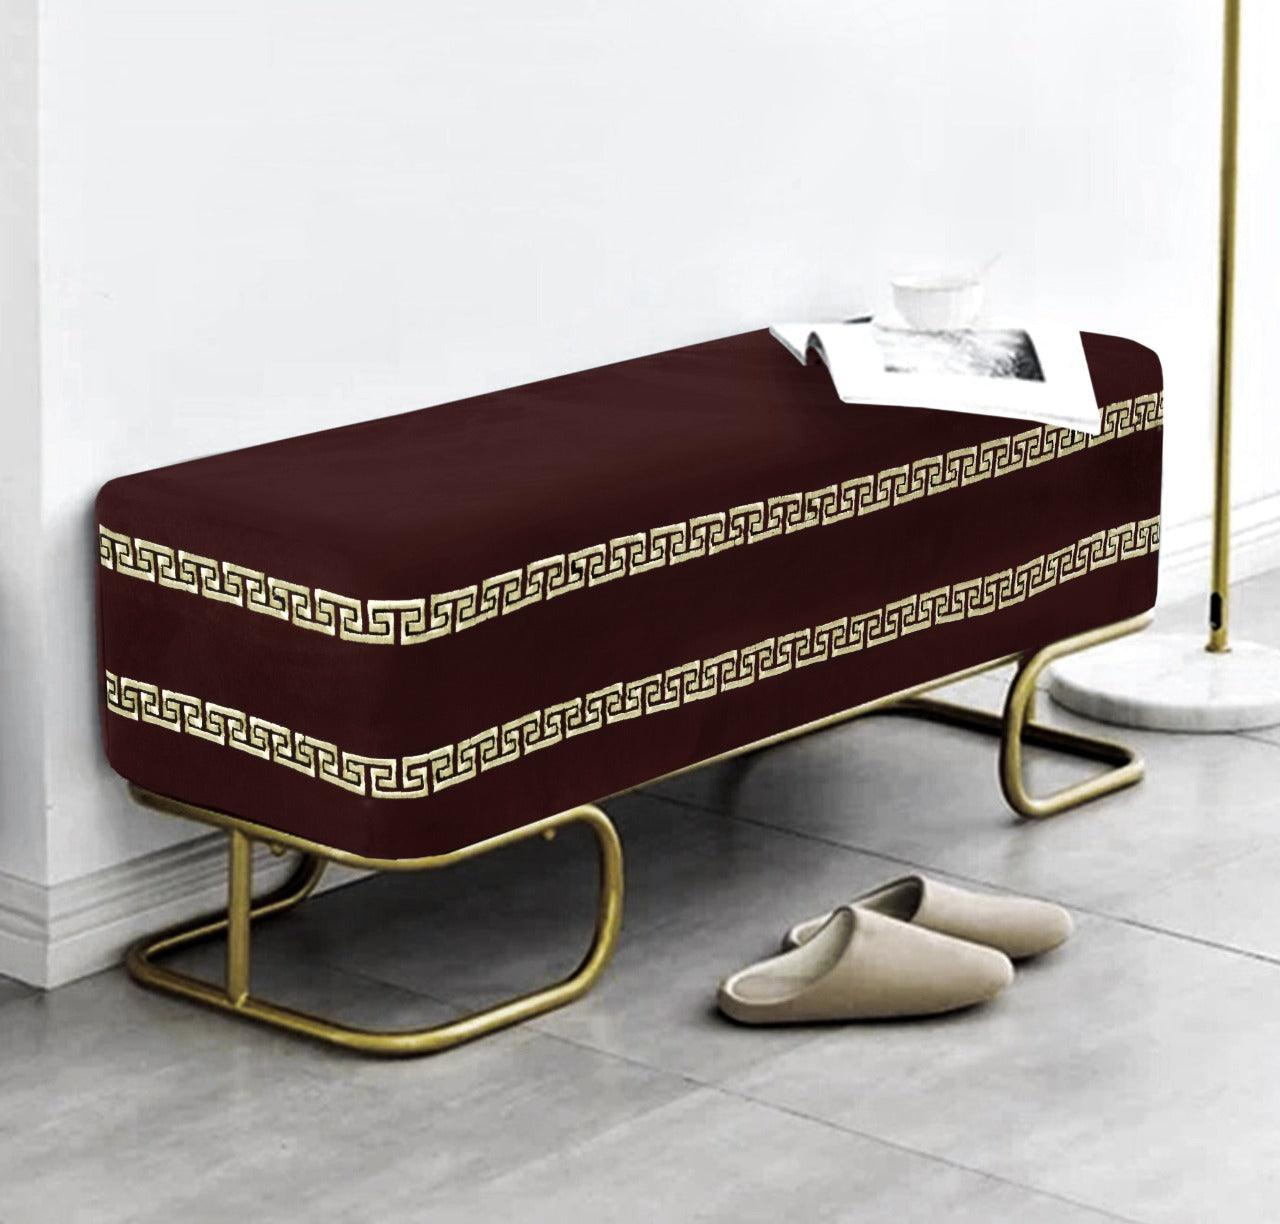 3 Seater Luxury Embroidered Wooden Stool With Steel Stand -761 - 92Bedding